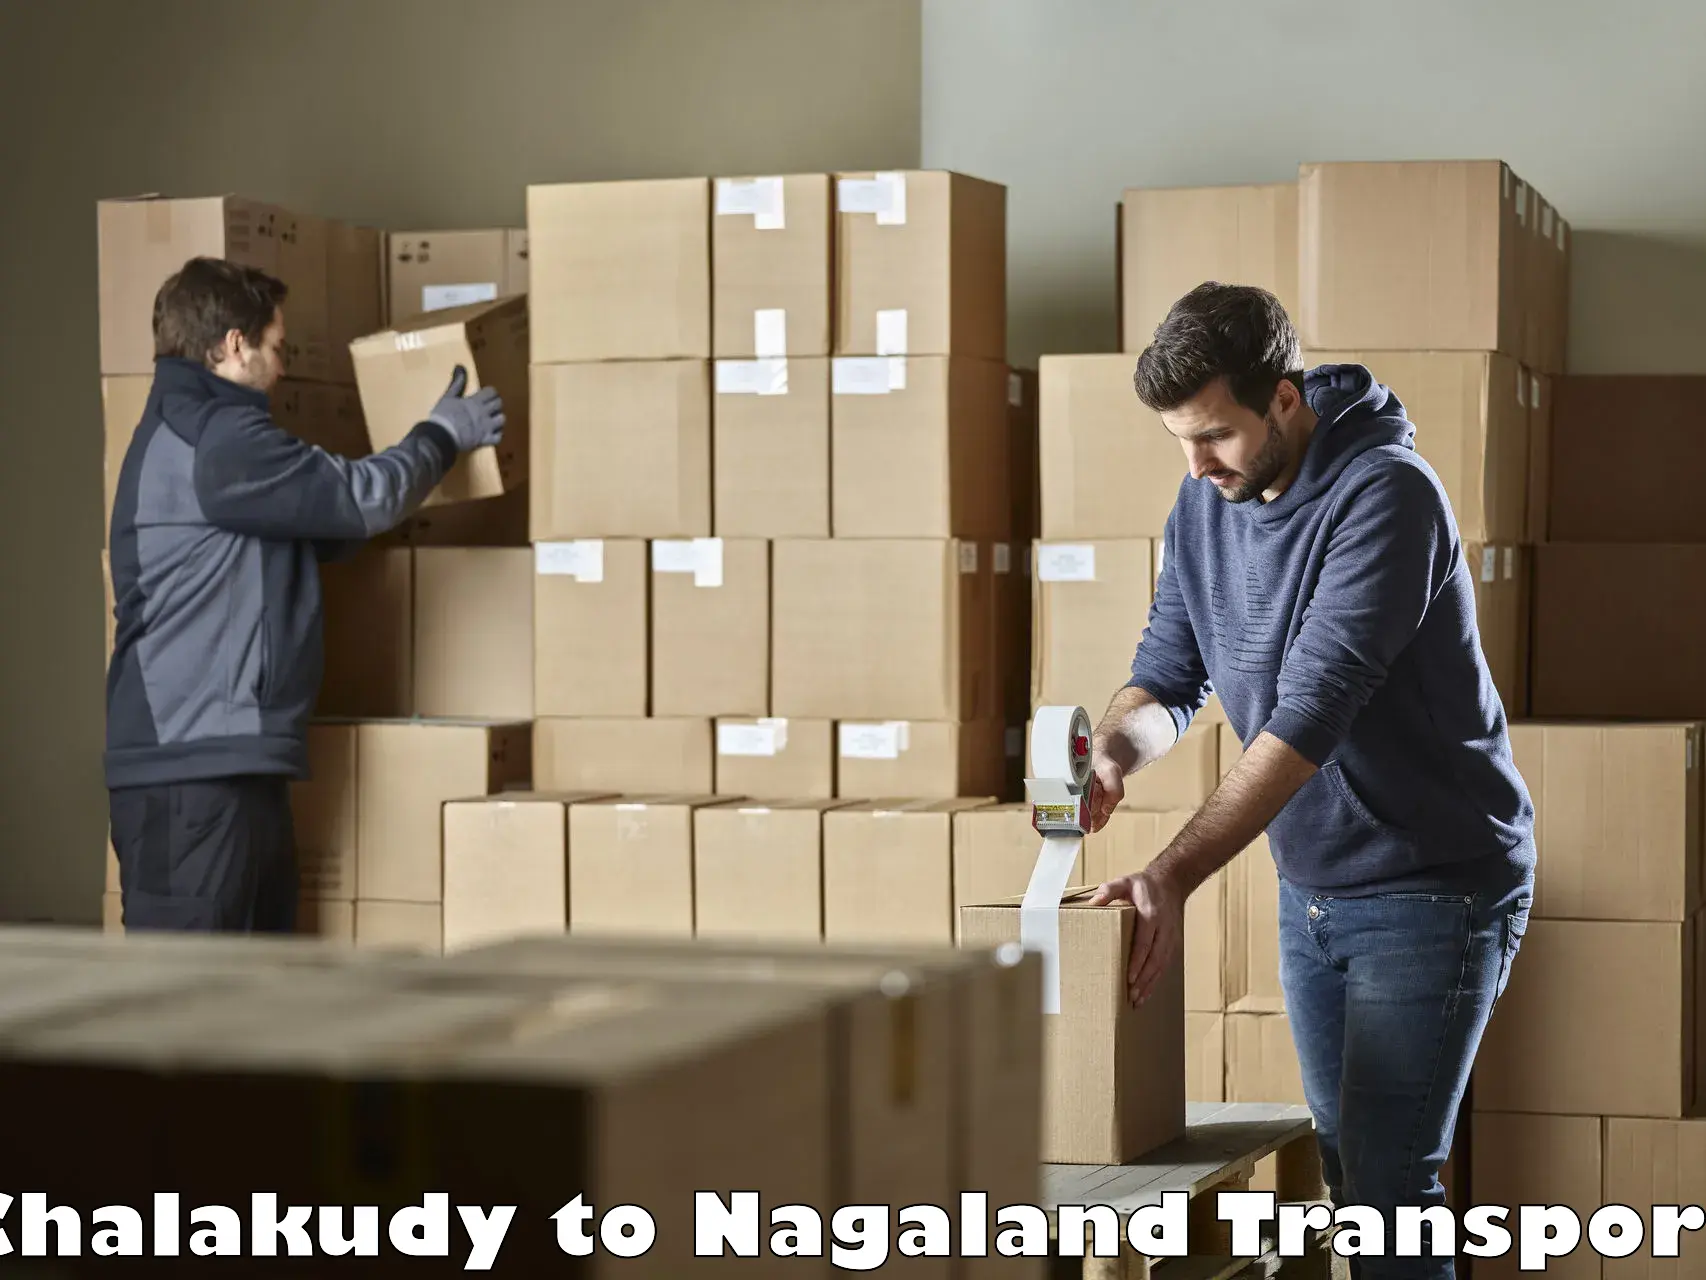 Daily transport service in Chalakudy to Nagaland